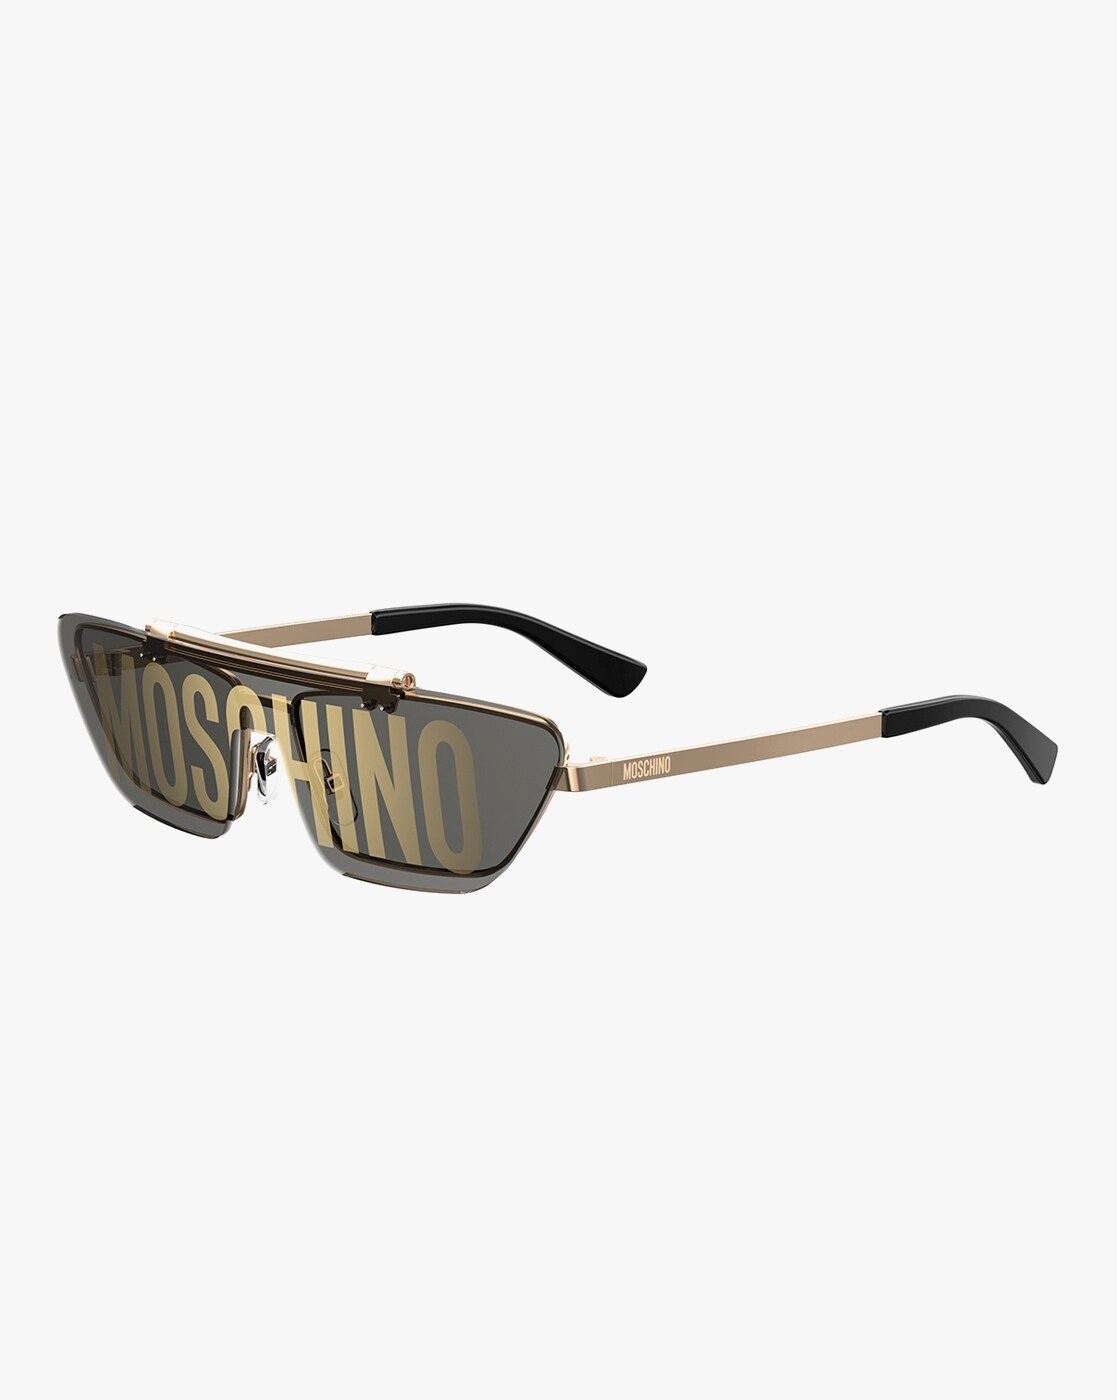 Luxury Attitude Mens Sunglasses With Z0256U Design, UV Protection Lens,  Square Full Gold Frame Mirror, Gold Plated Frame Includes Package 61mm From  Chengcheng8888, $8.71